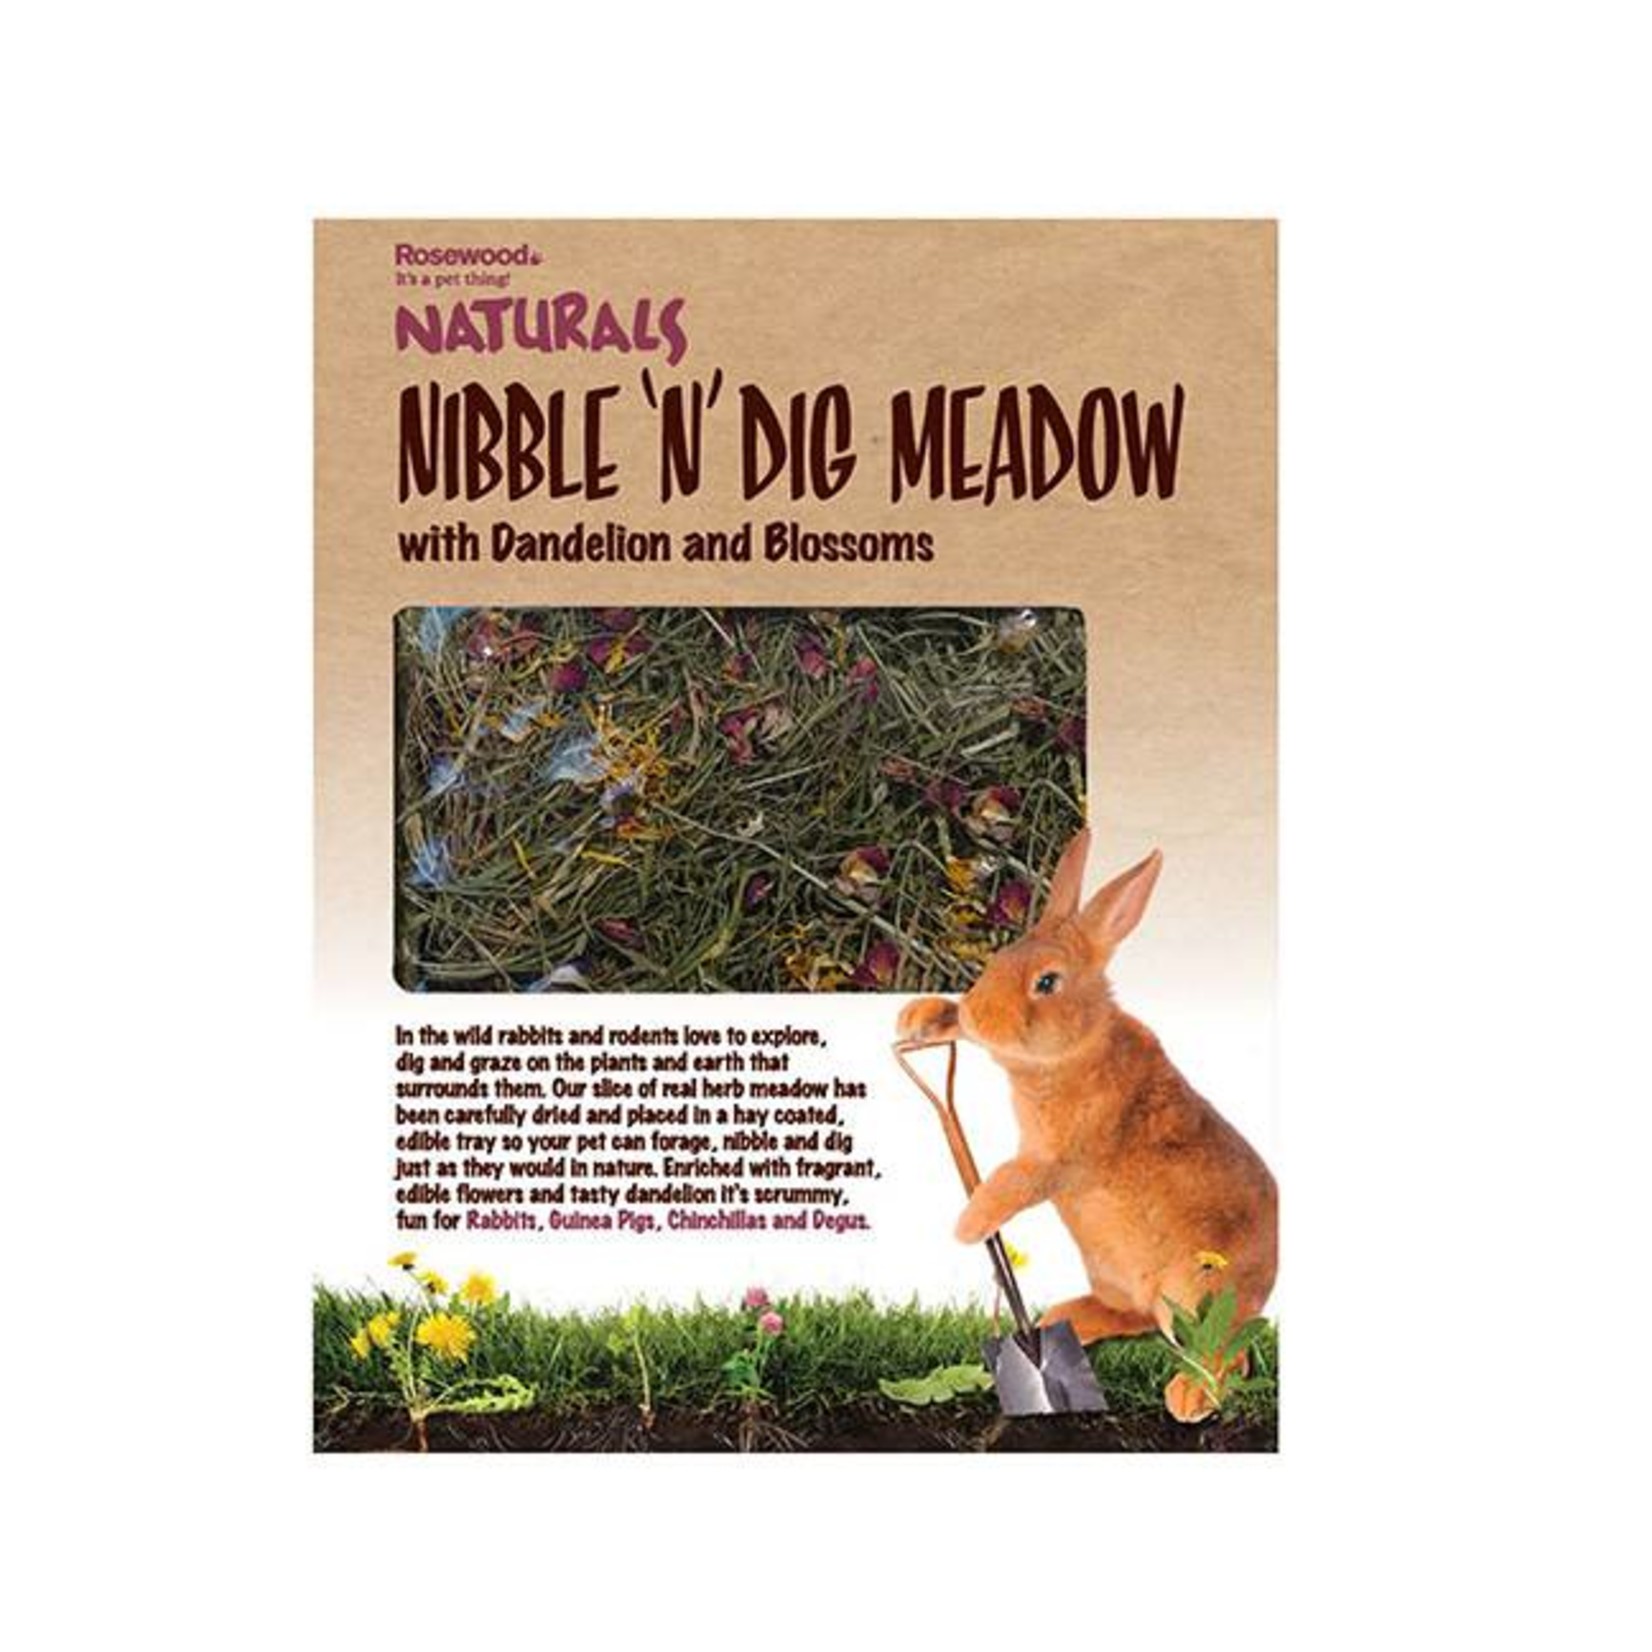 Rosewood Naturals Nibble & Dig Dandelion & Blossom Meadow Small Animal Treat